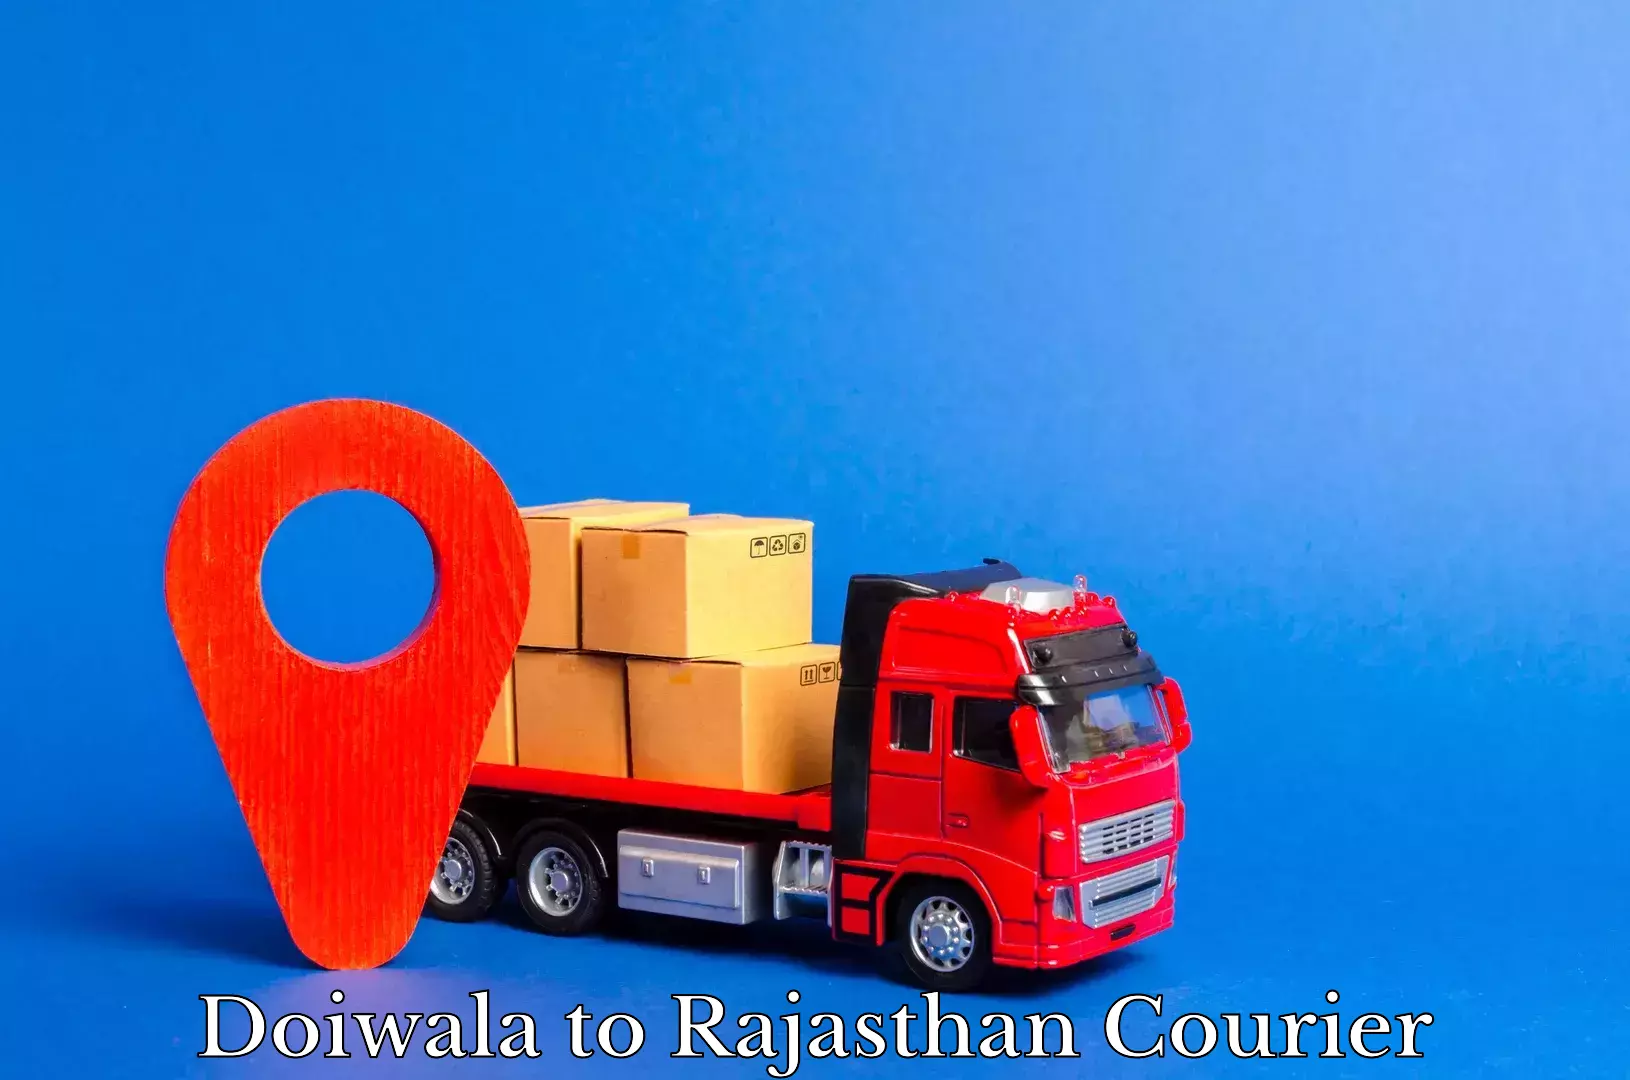 Cargo delivery service Doiwala to Rajasthan